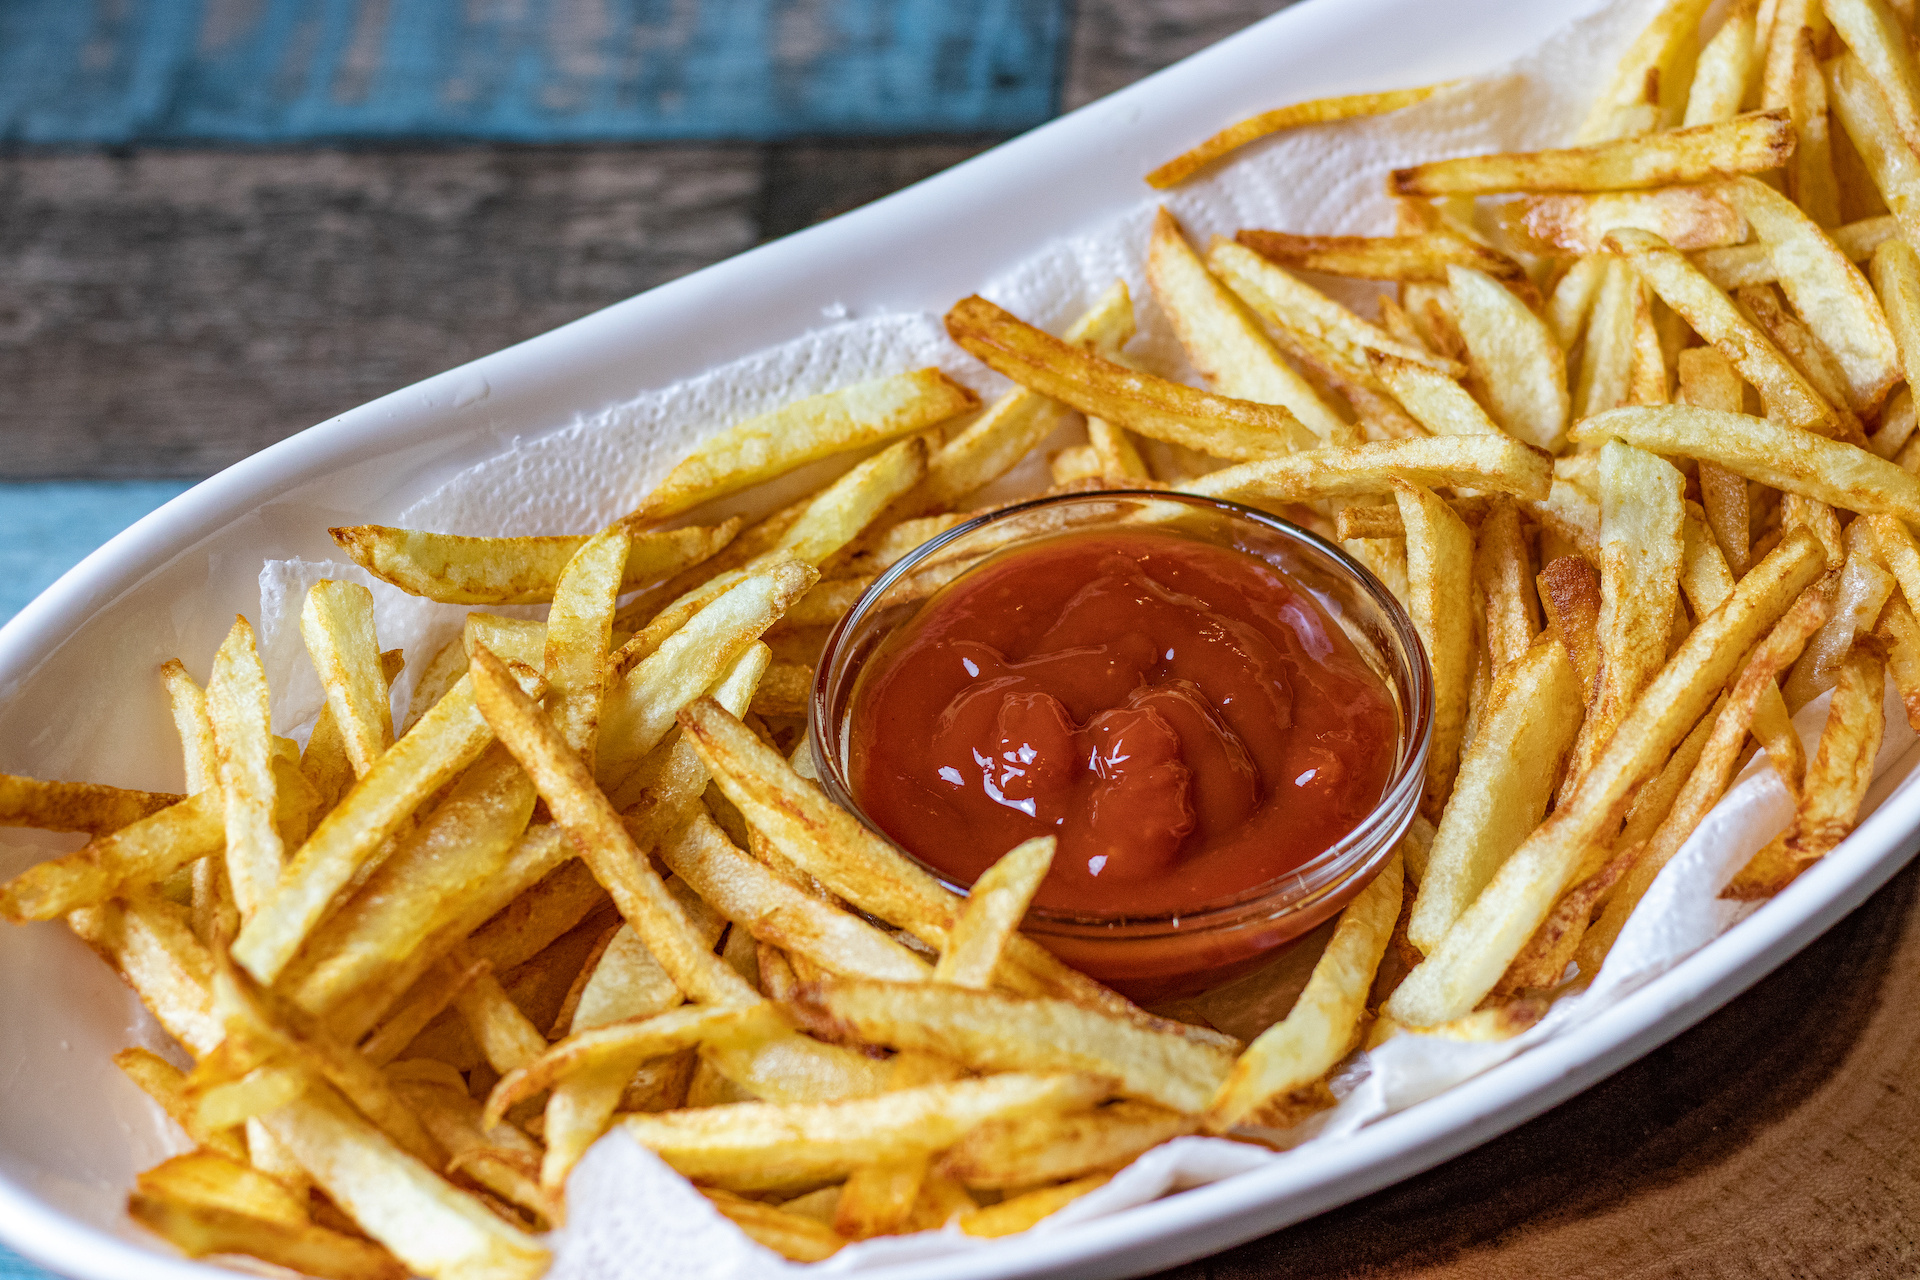 French Fries: Served hot and accompanied by ketchup, mayonnaise, mustard. 1920x1280 HD Wallpaper.